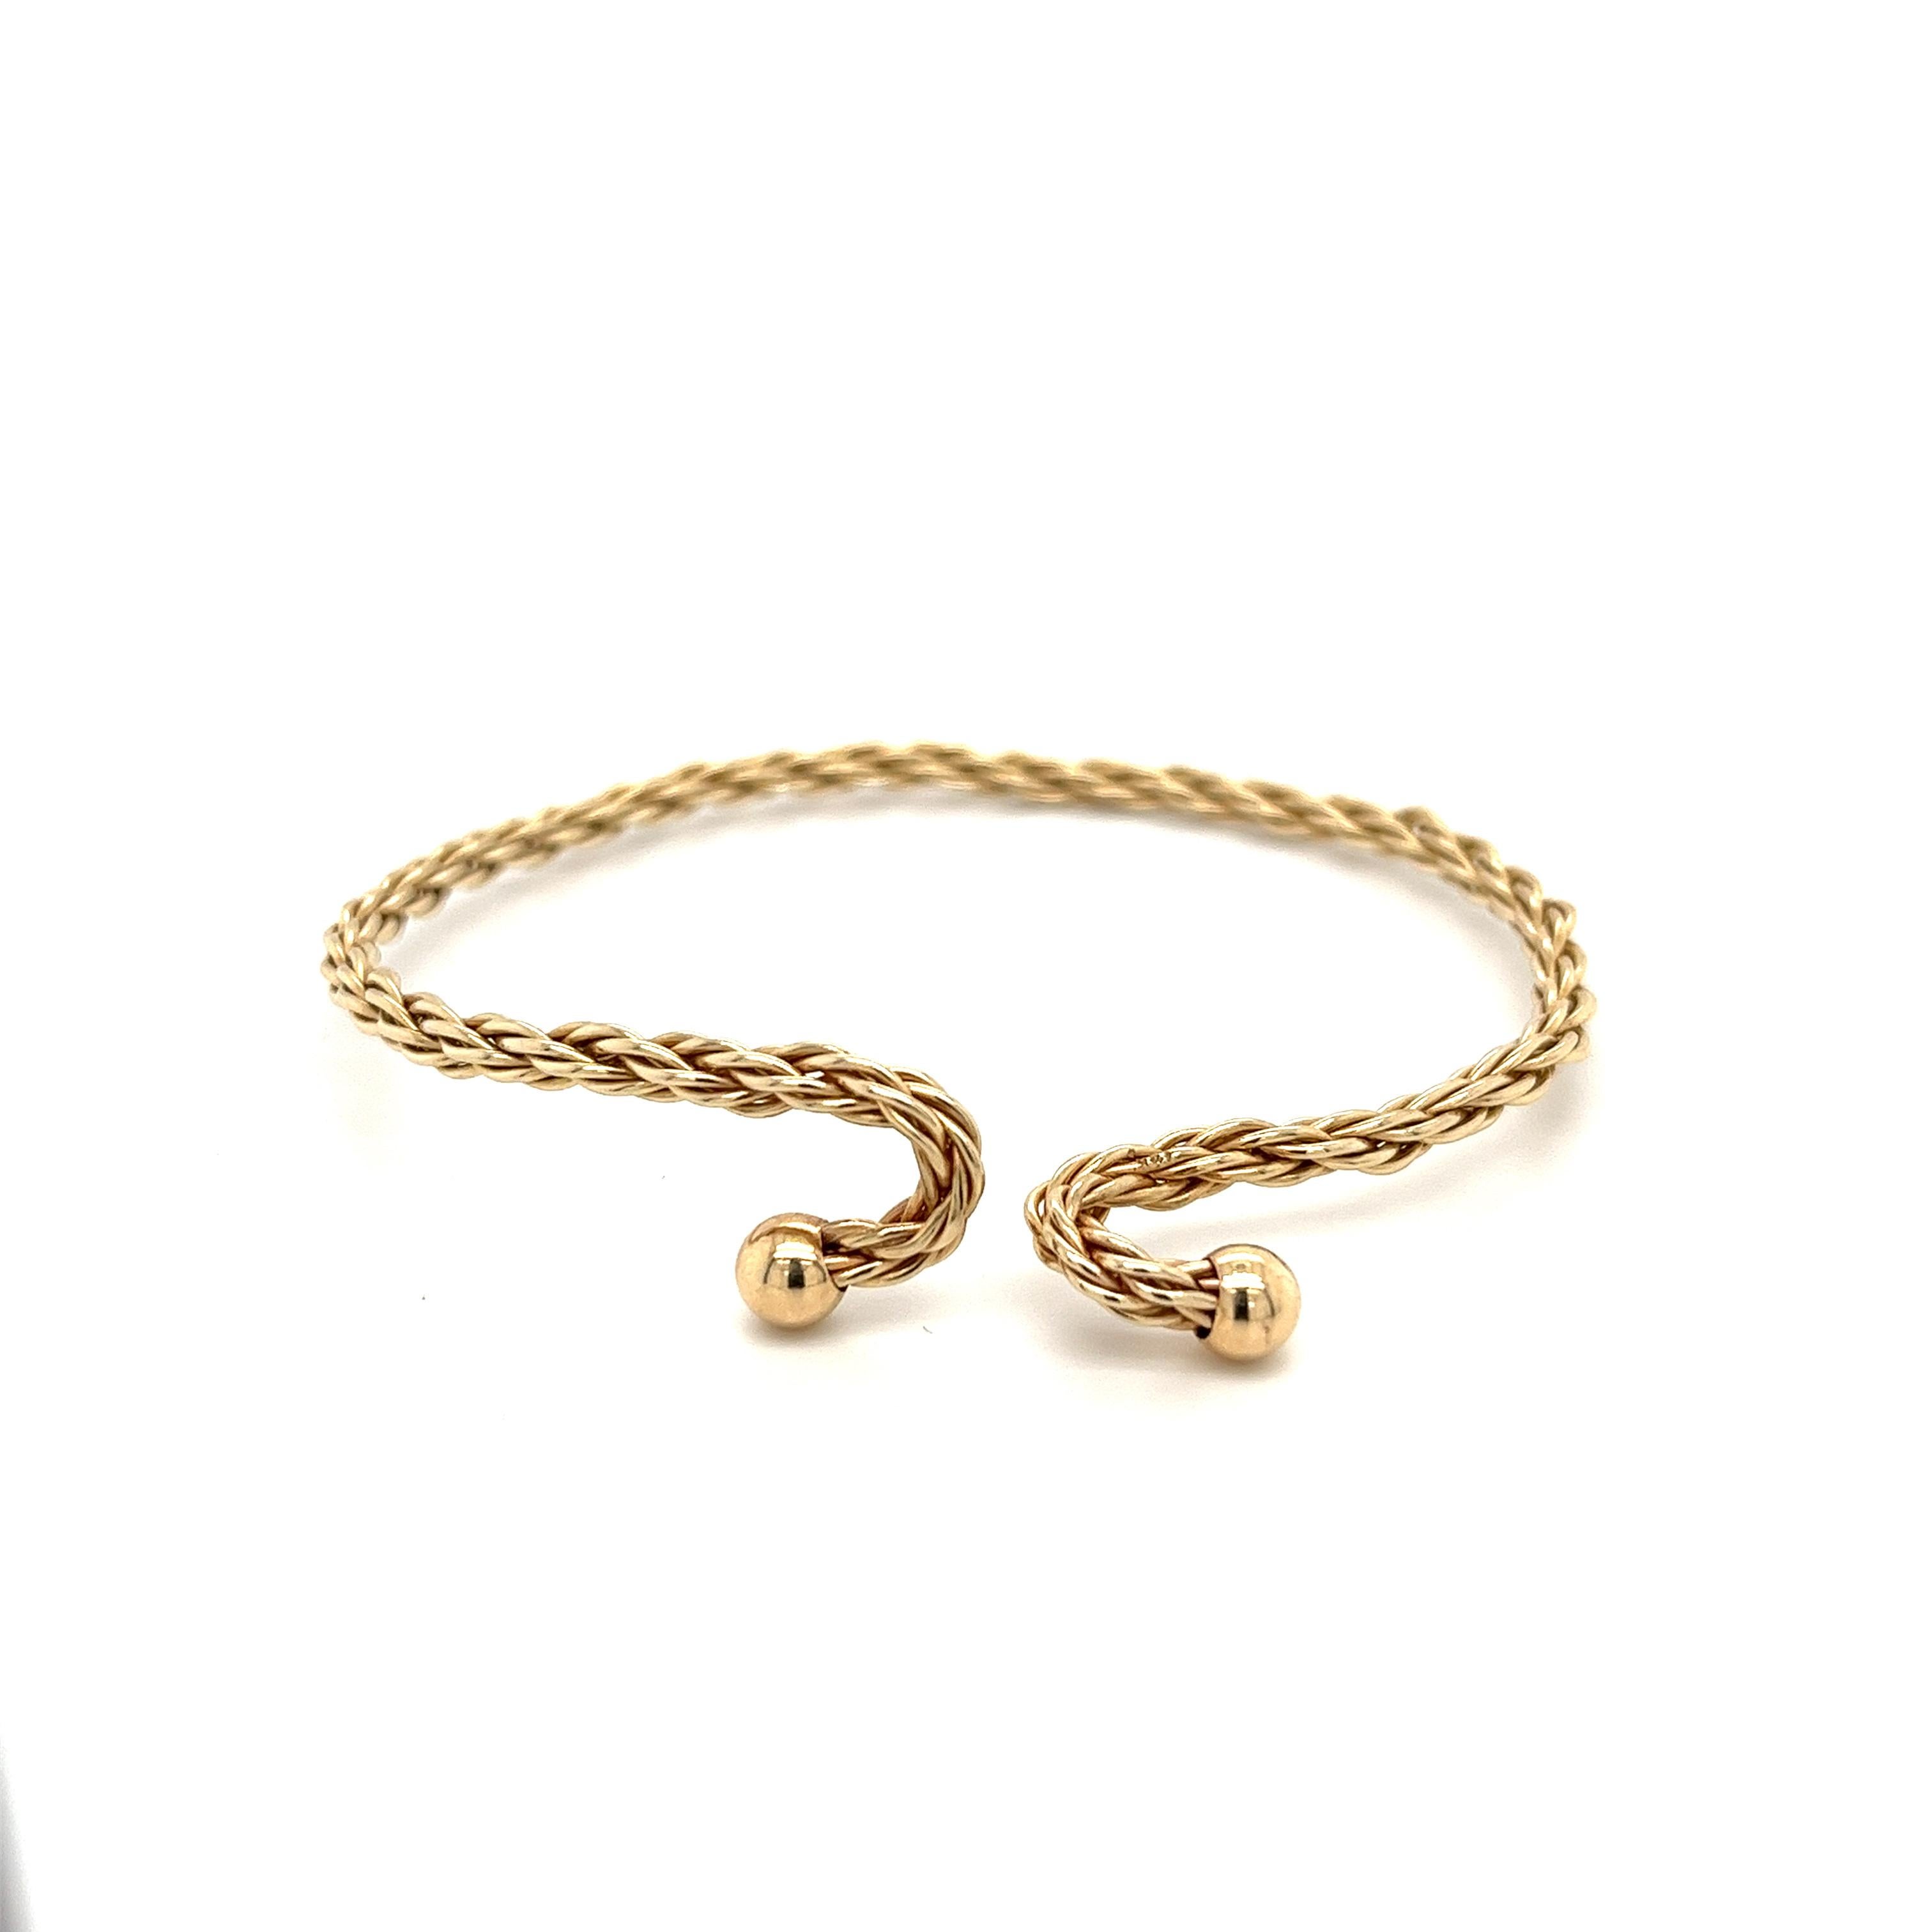 SKU: POTC1449B 

Interlocking 14k solid yellow gold rope chain bangle bracelet. Hypoallergenic and waterproof. The perfect fine jewelry gift for that special someone.

Details:
✔ Metal: 14k (solid)
✔ 5-inch Diameter
✔ 3mm Width
✔ Rope Chain